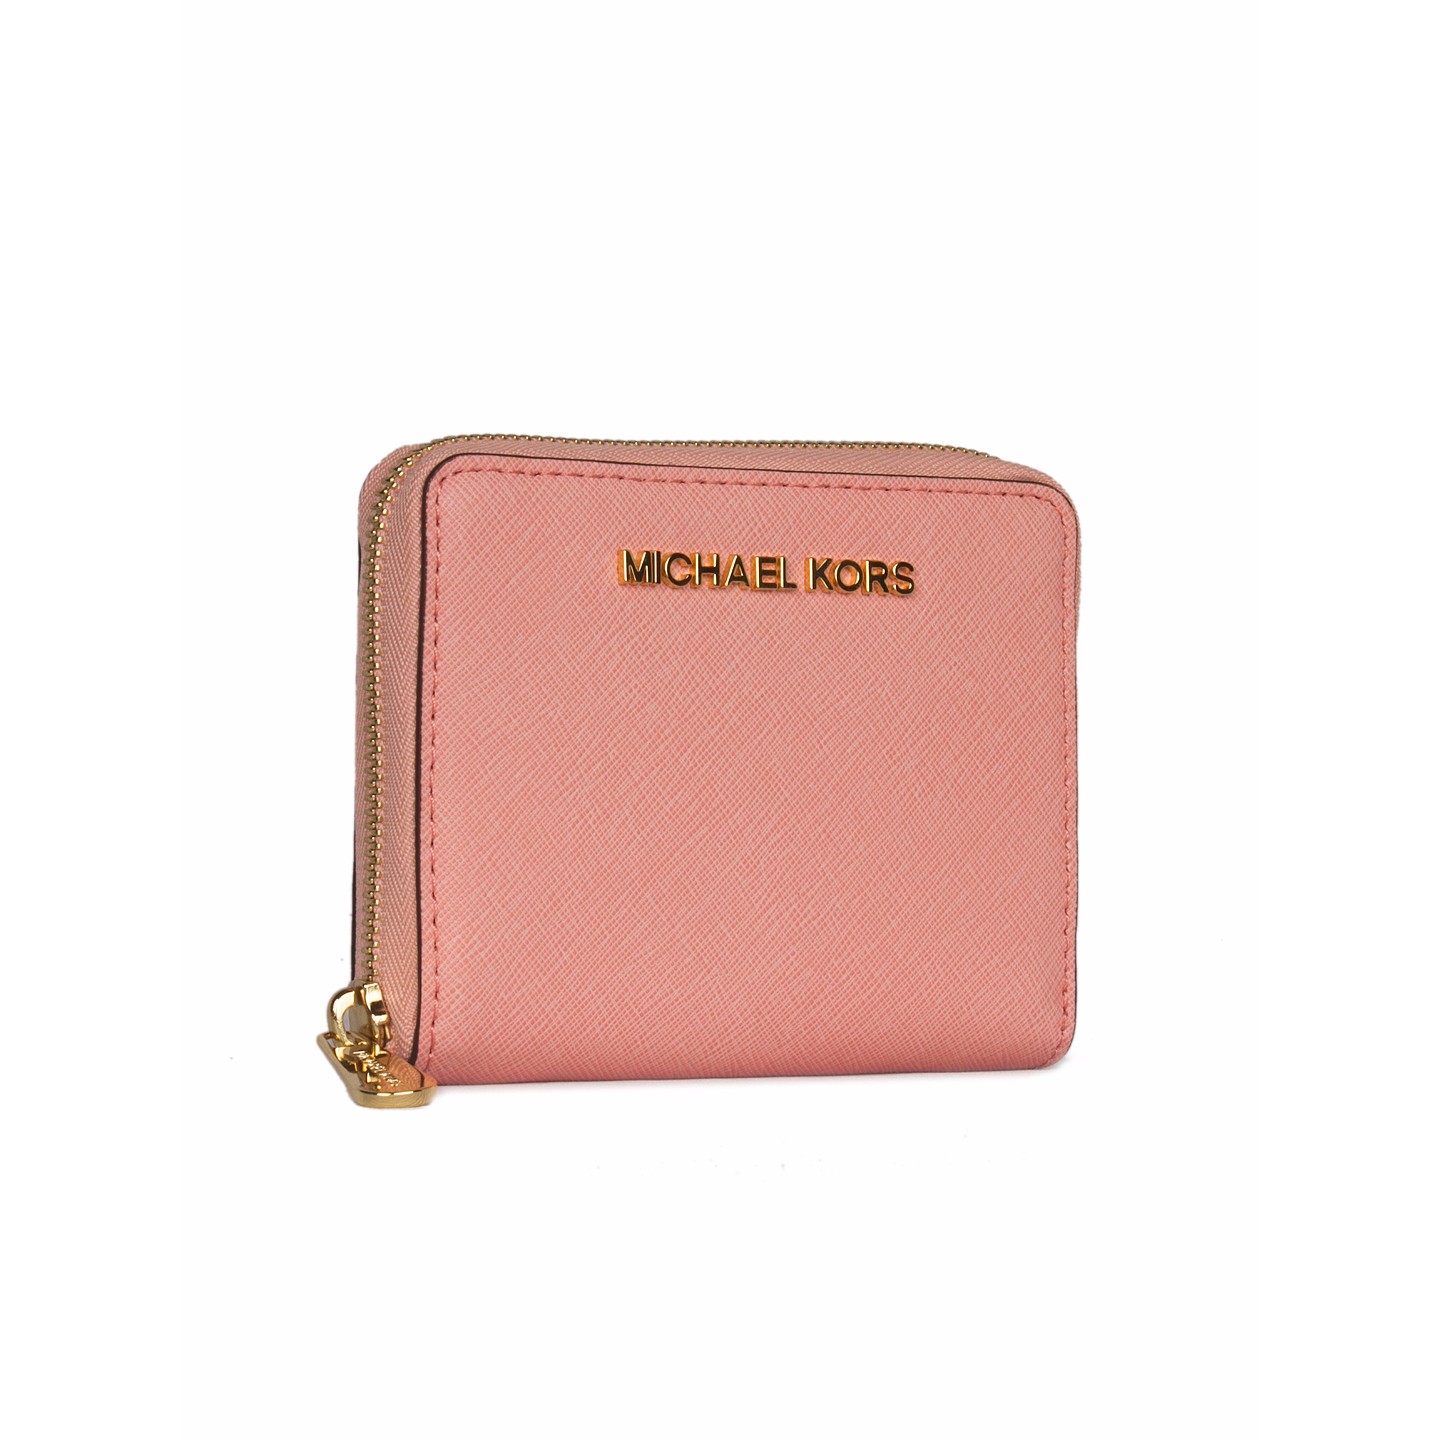 Michael Kors Small Zip Around Leather Wallet - LabelCentric